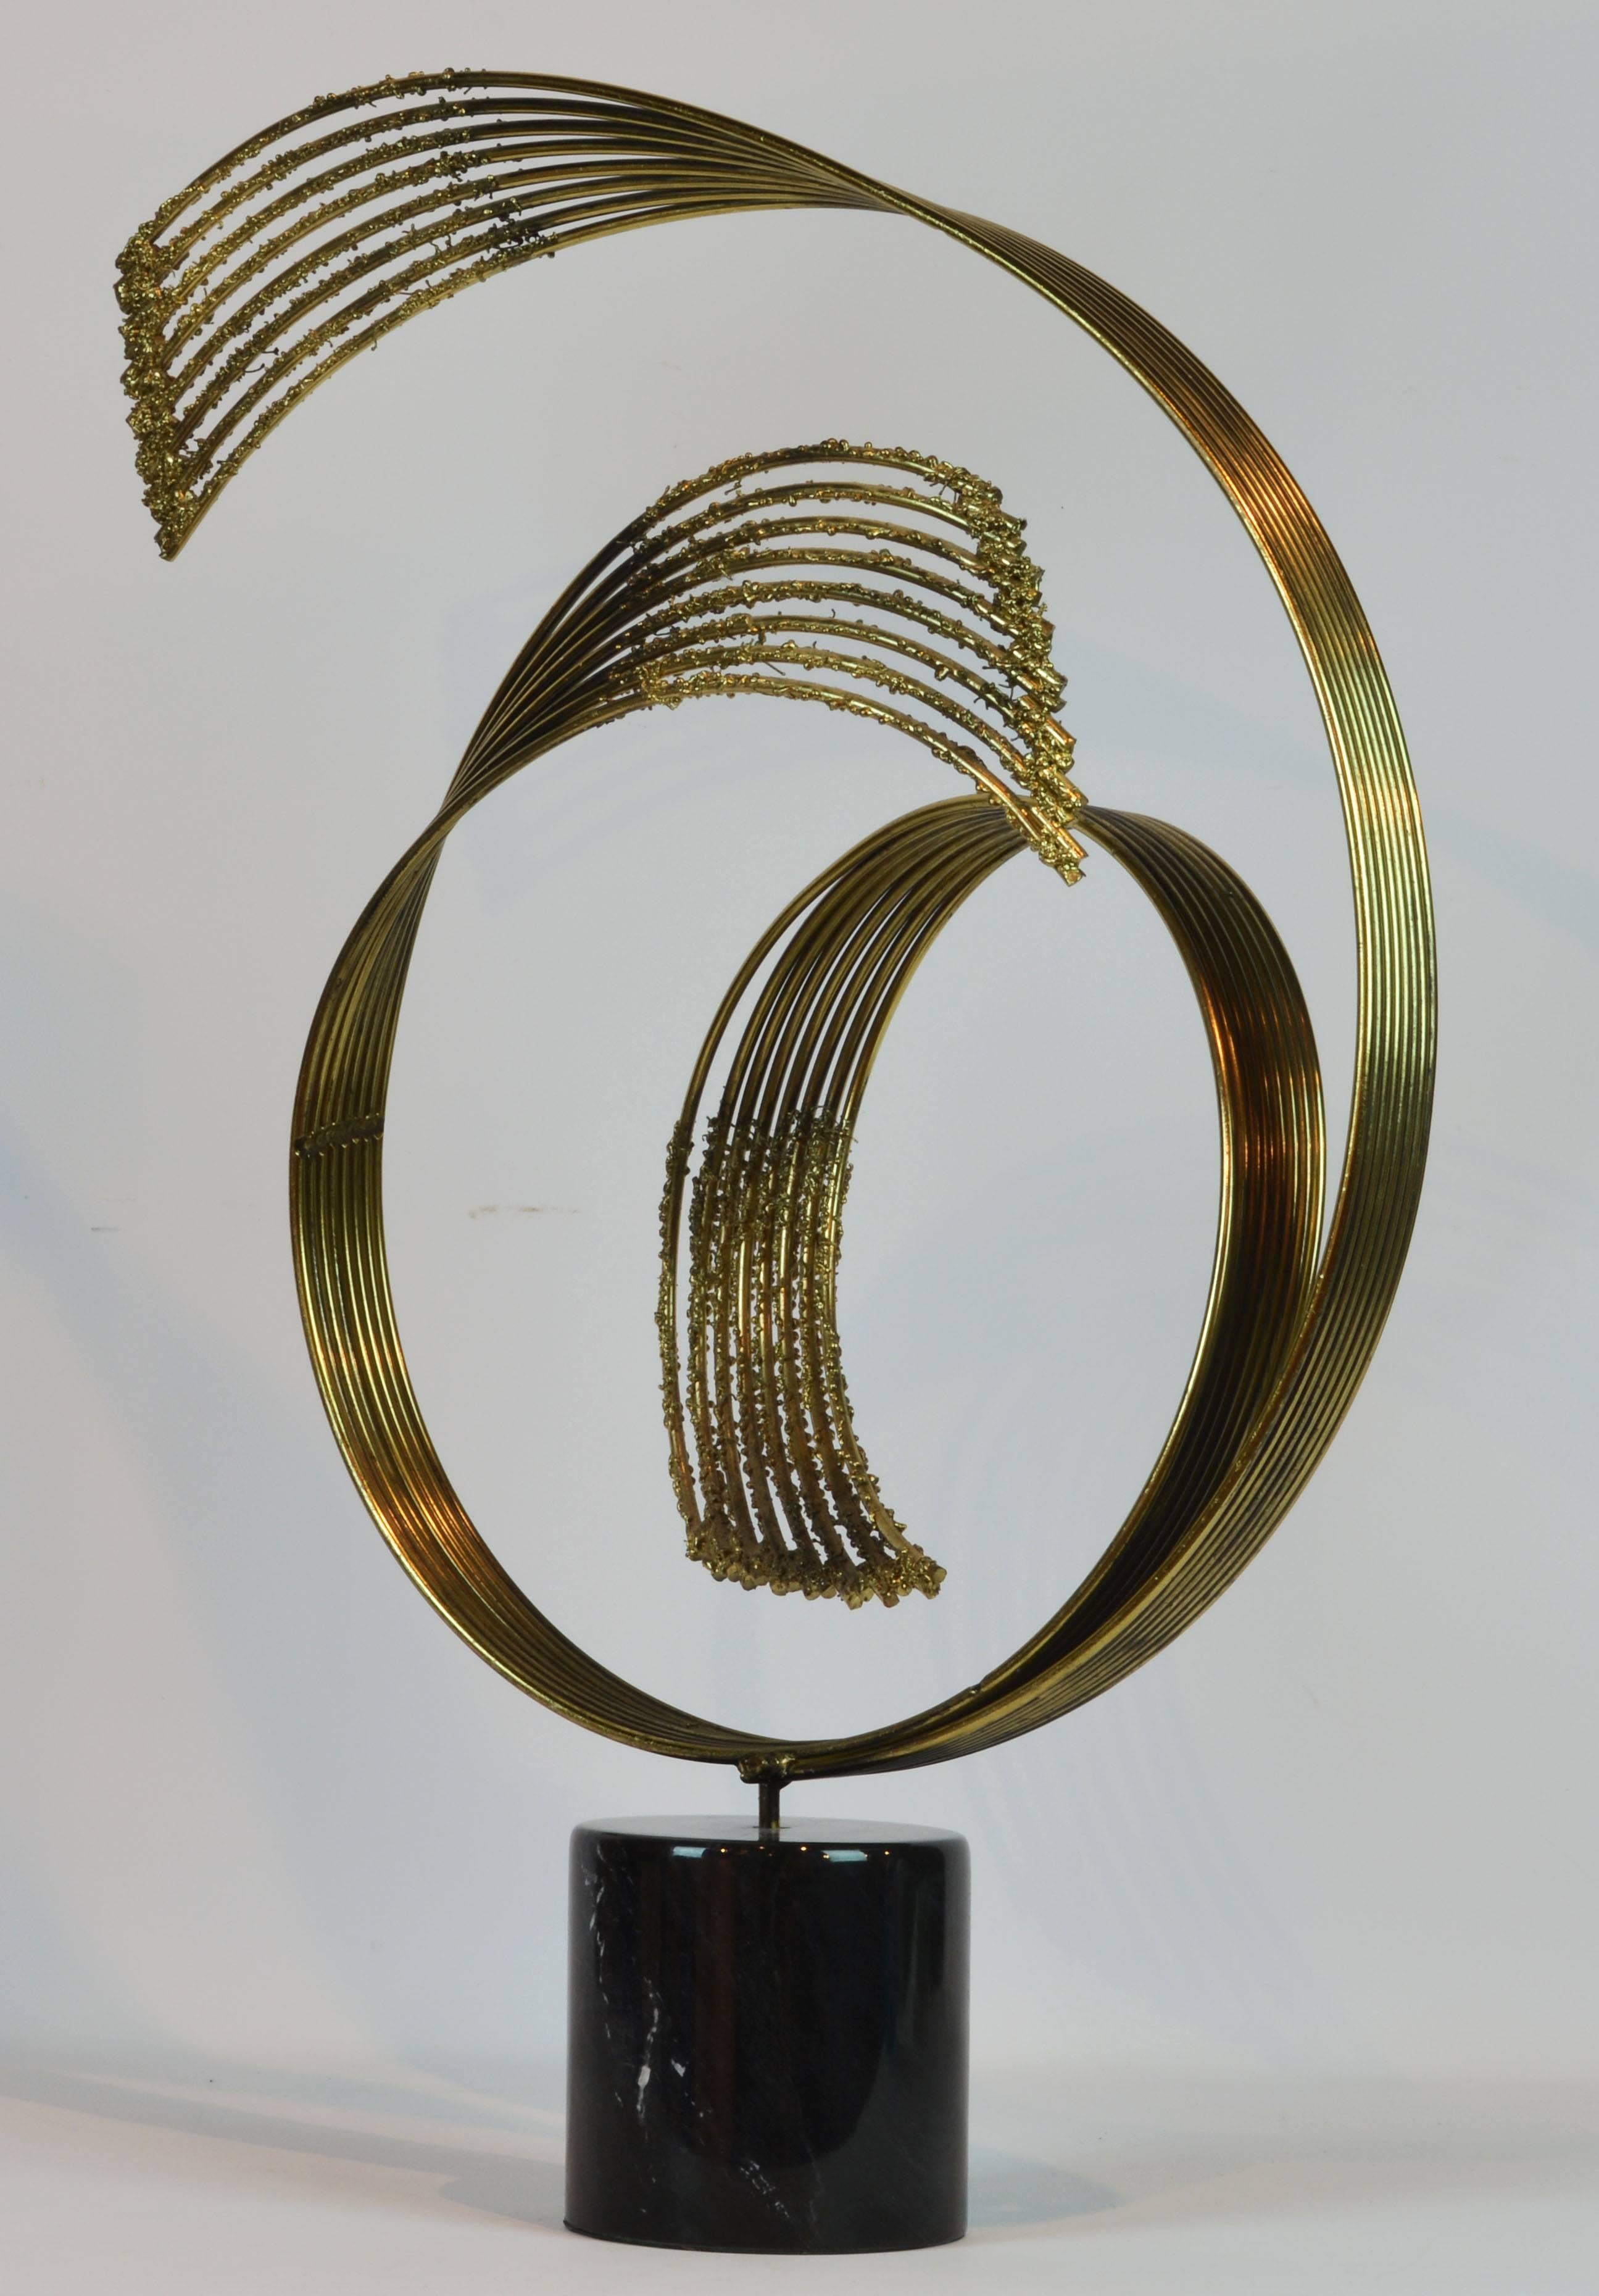 American Stunning Midcentury Abstract Swirling Brass Sculpture Signed by Curtis Jere